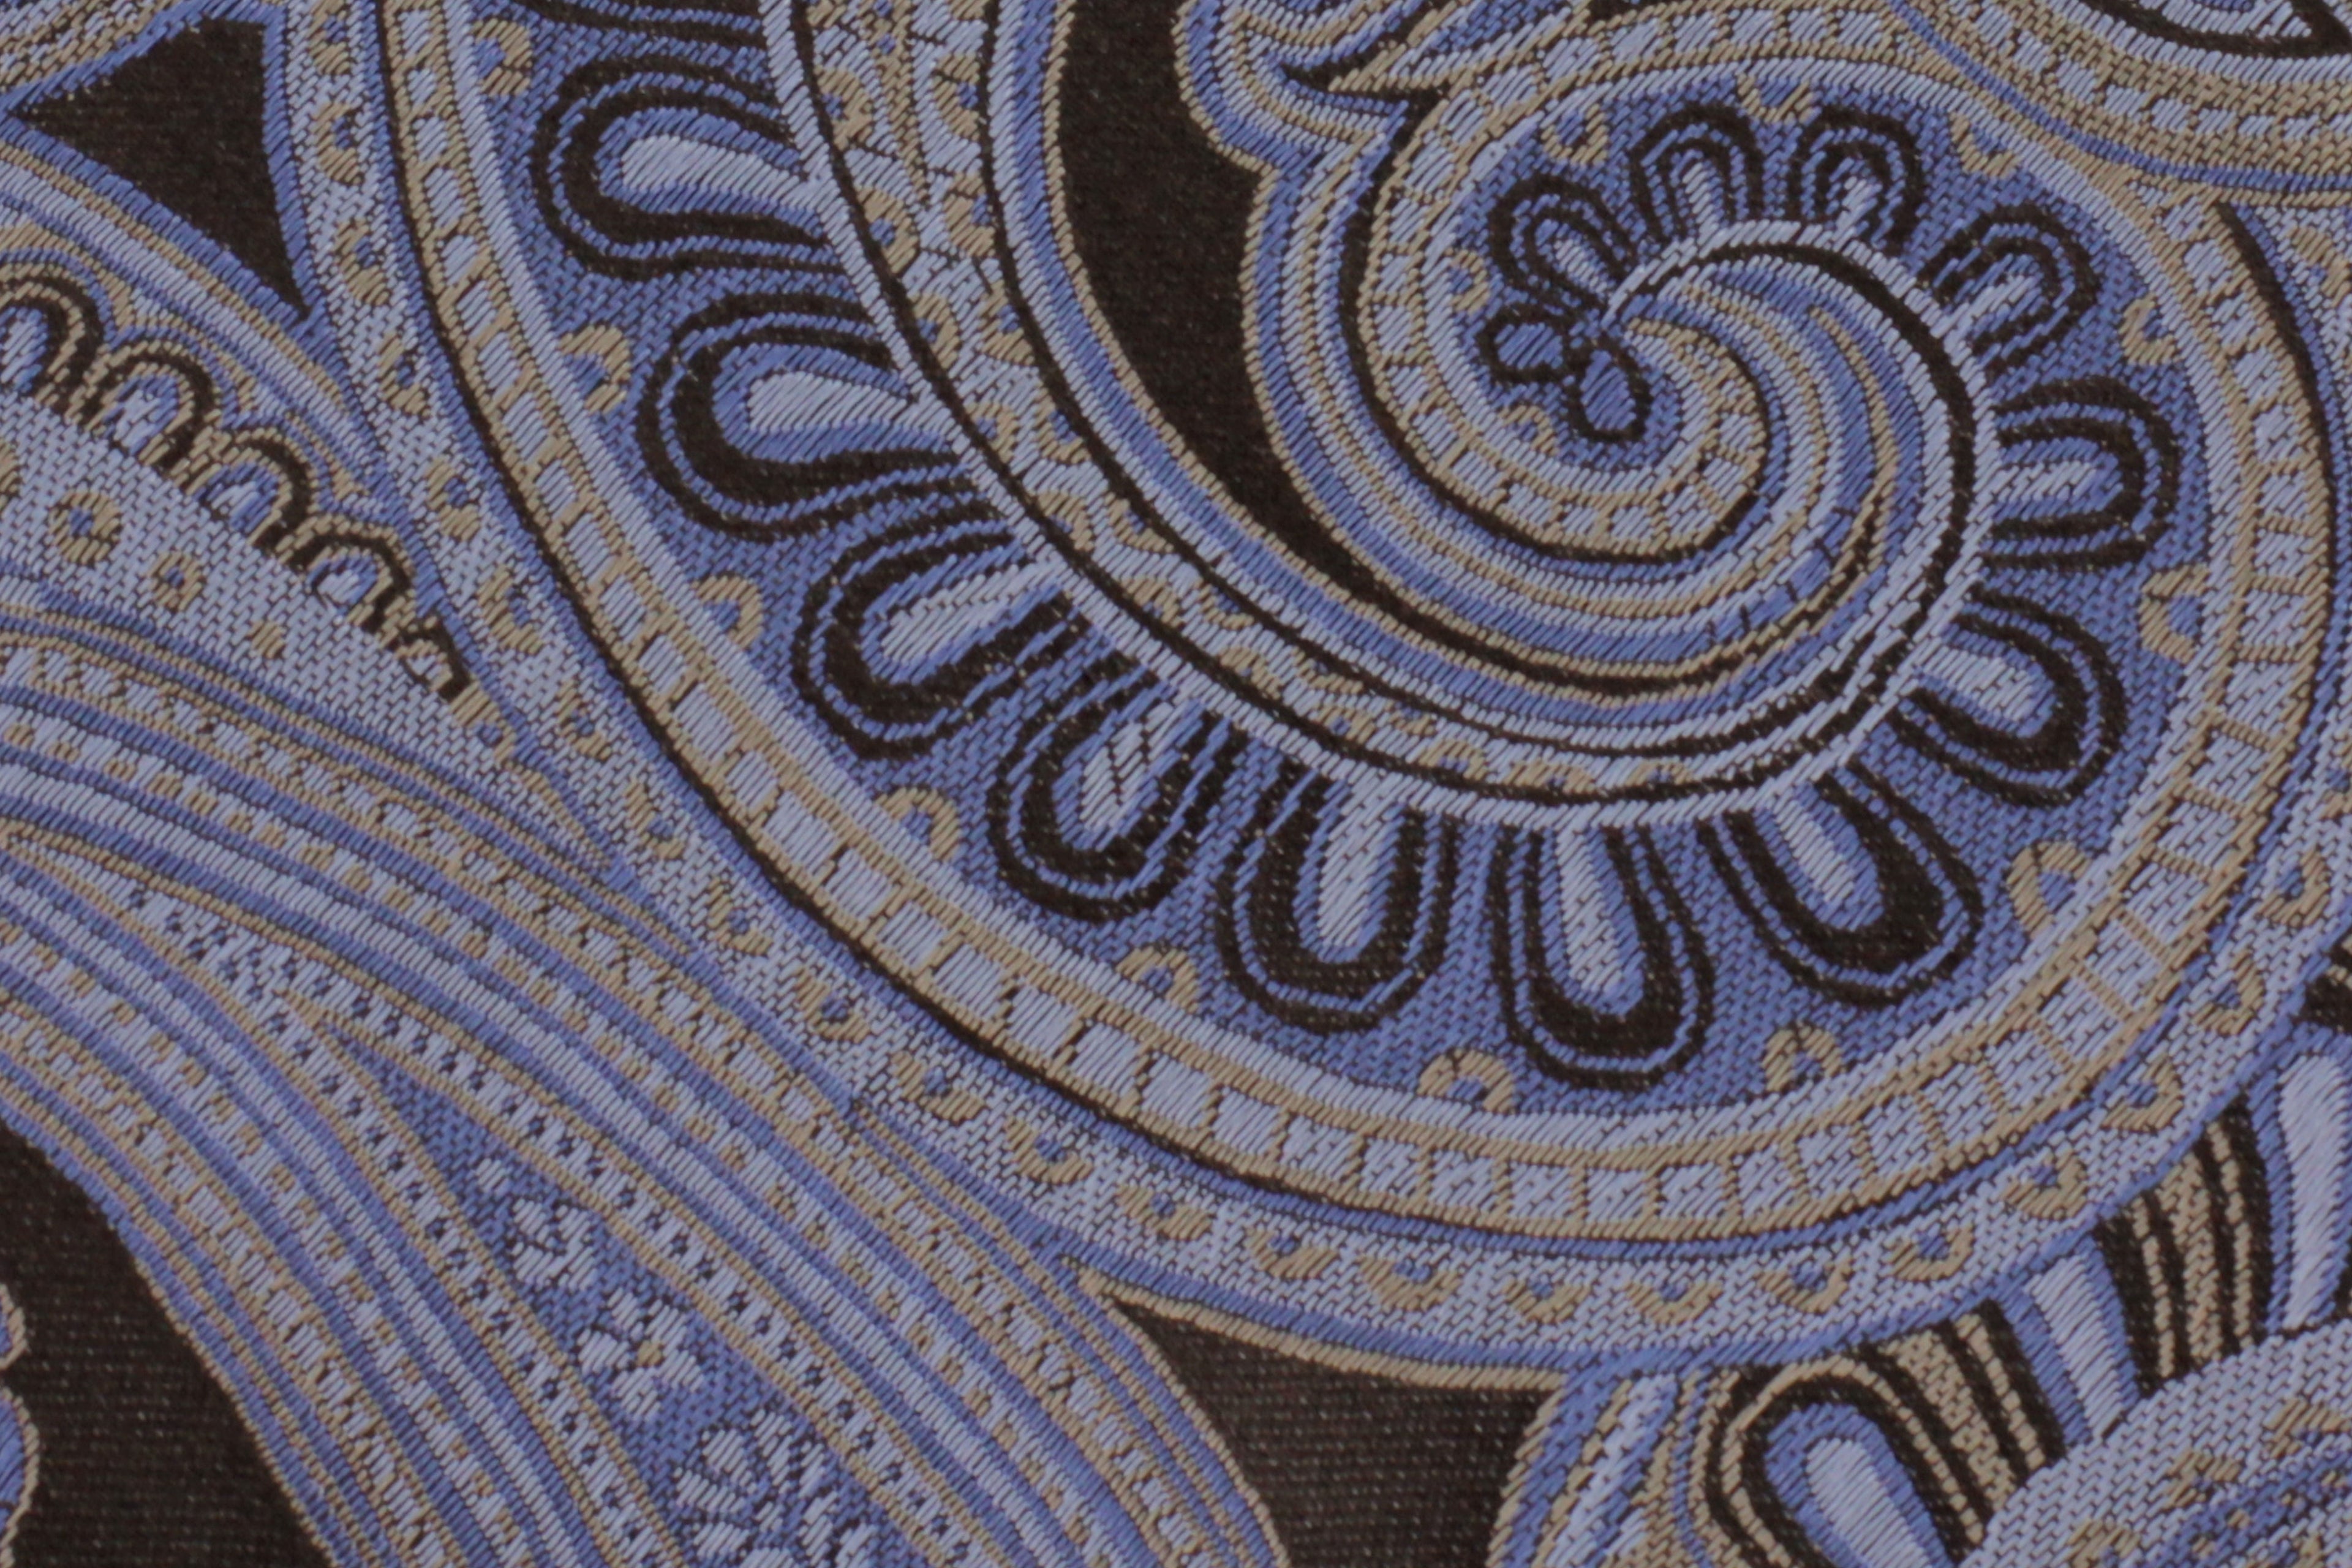 100% Silk XL Tie with Paisley Pattern for Big and Tall Men